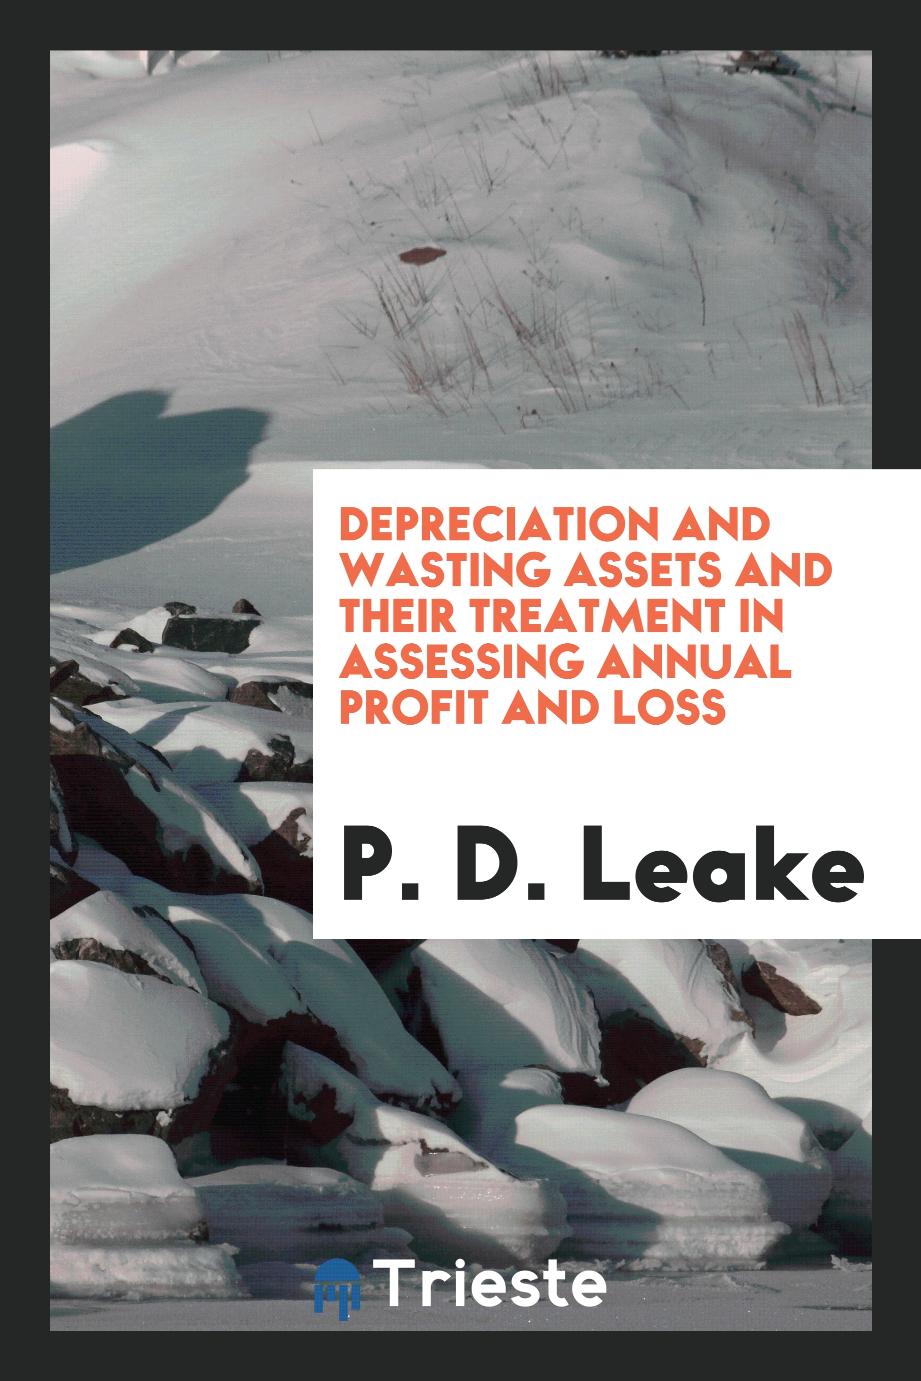 Depreciation and Wasting Assets and Their Treatment in Assessing Annual Profit and Loss